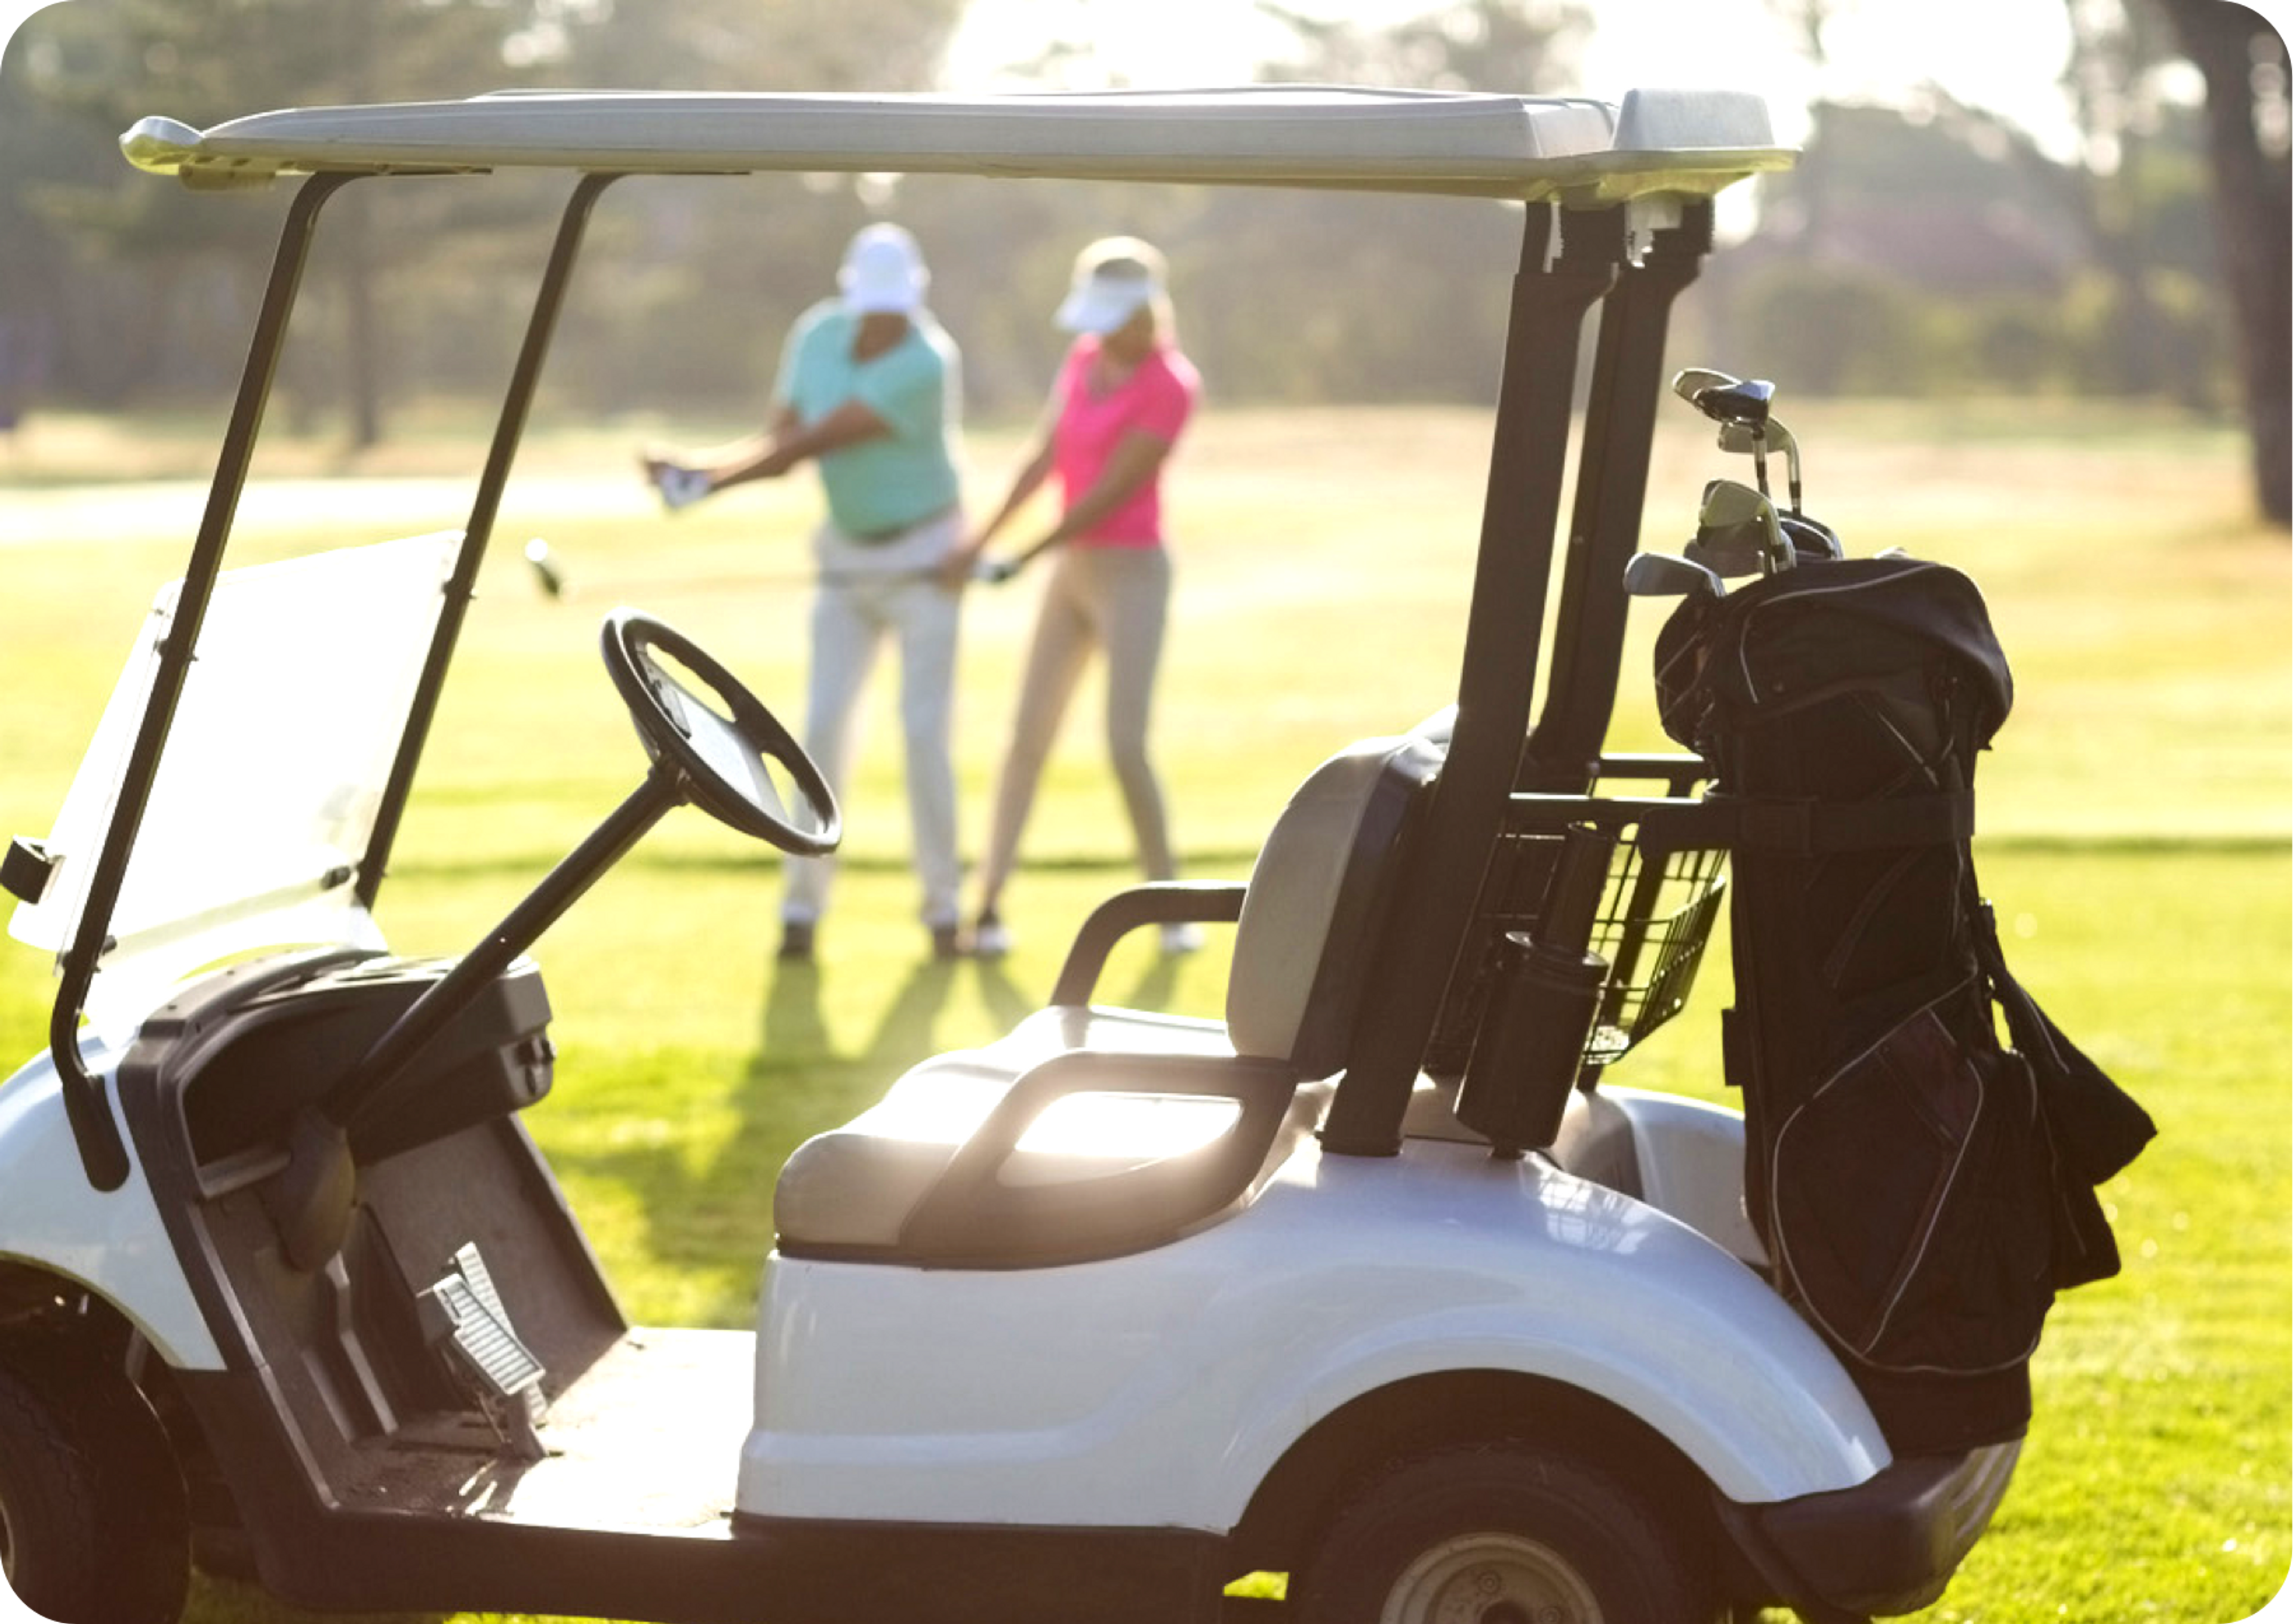 Picture of a white golf cart with a female and male golfer in the image background